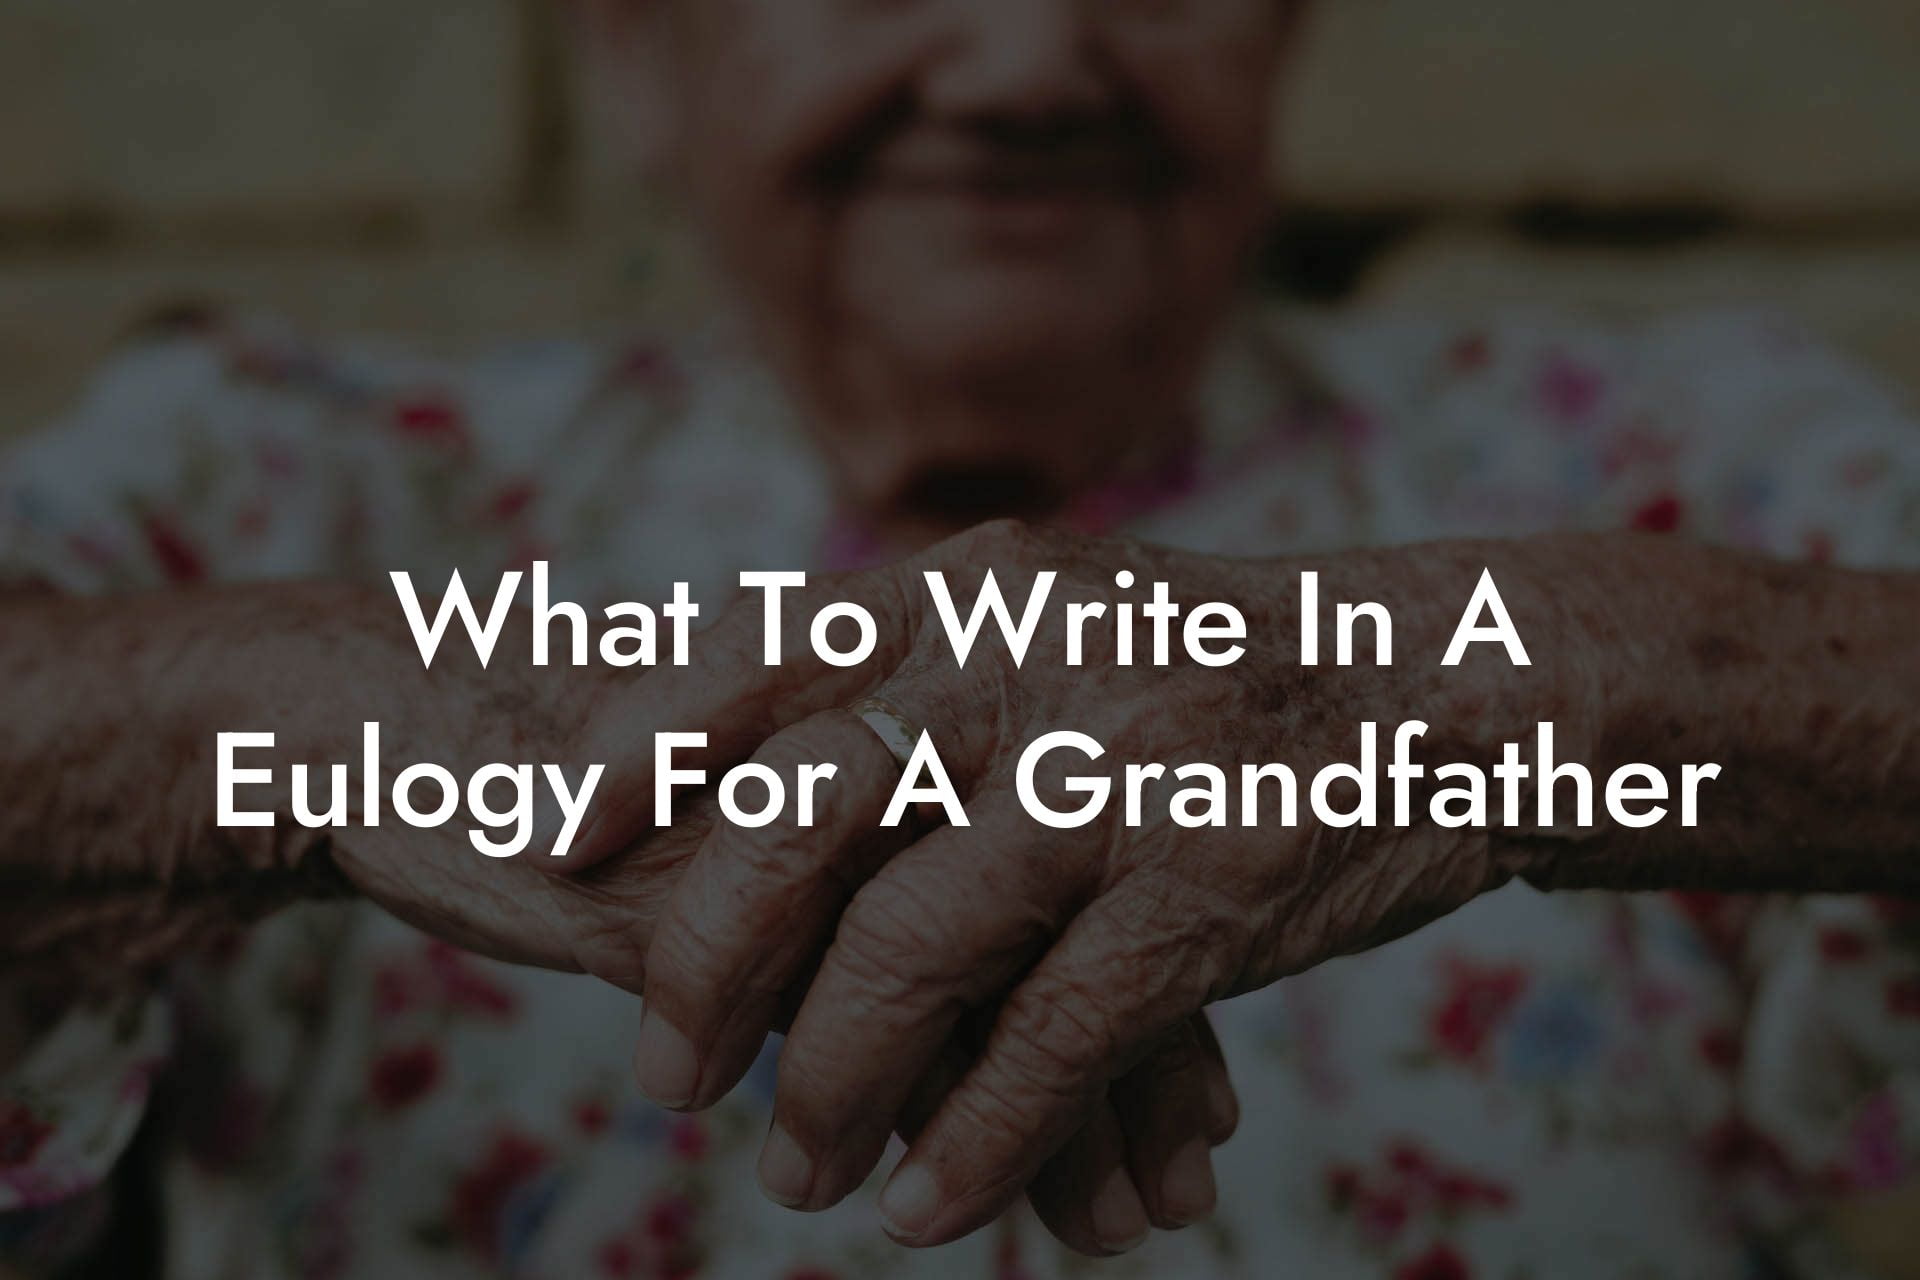 What To Write In A Eulogy For A Grandfather